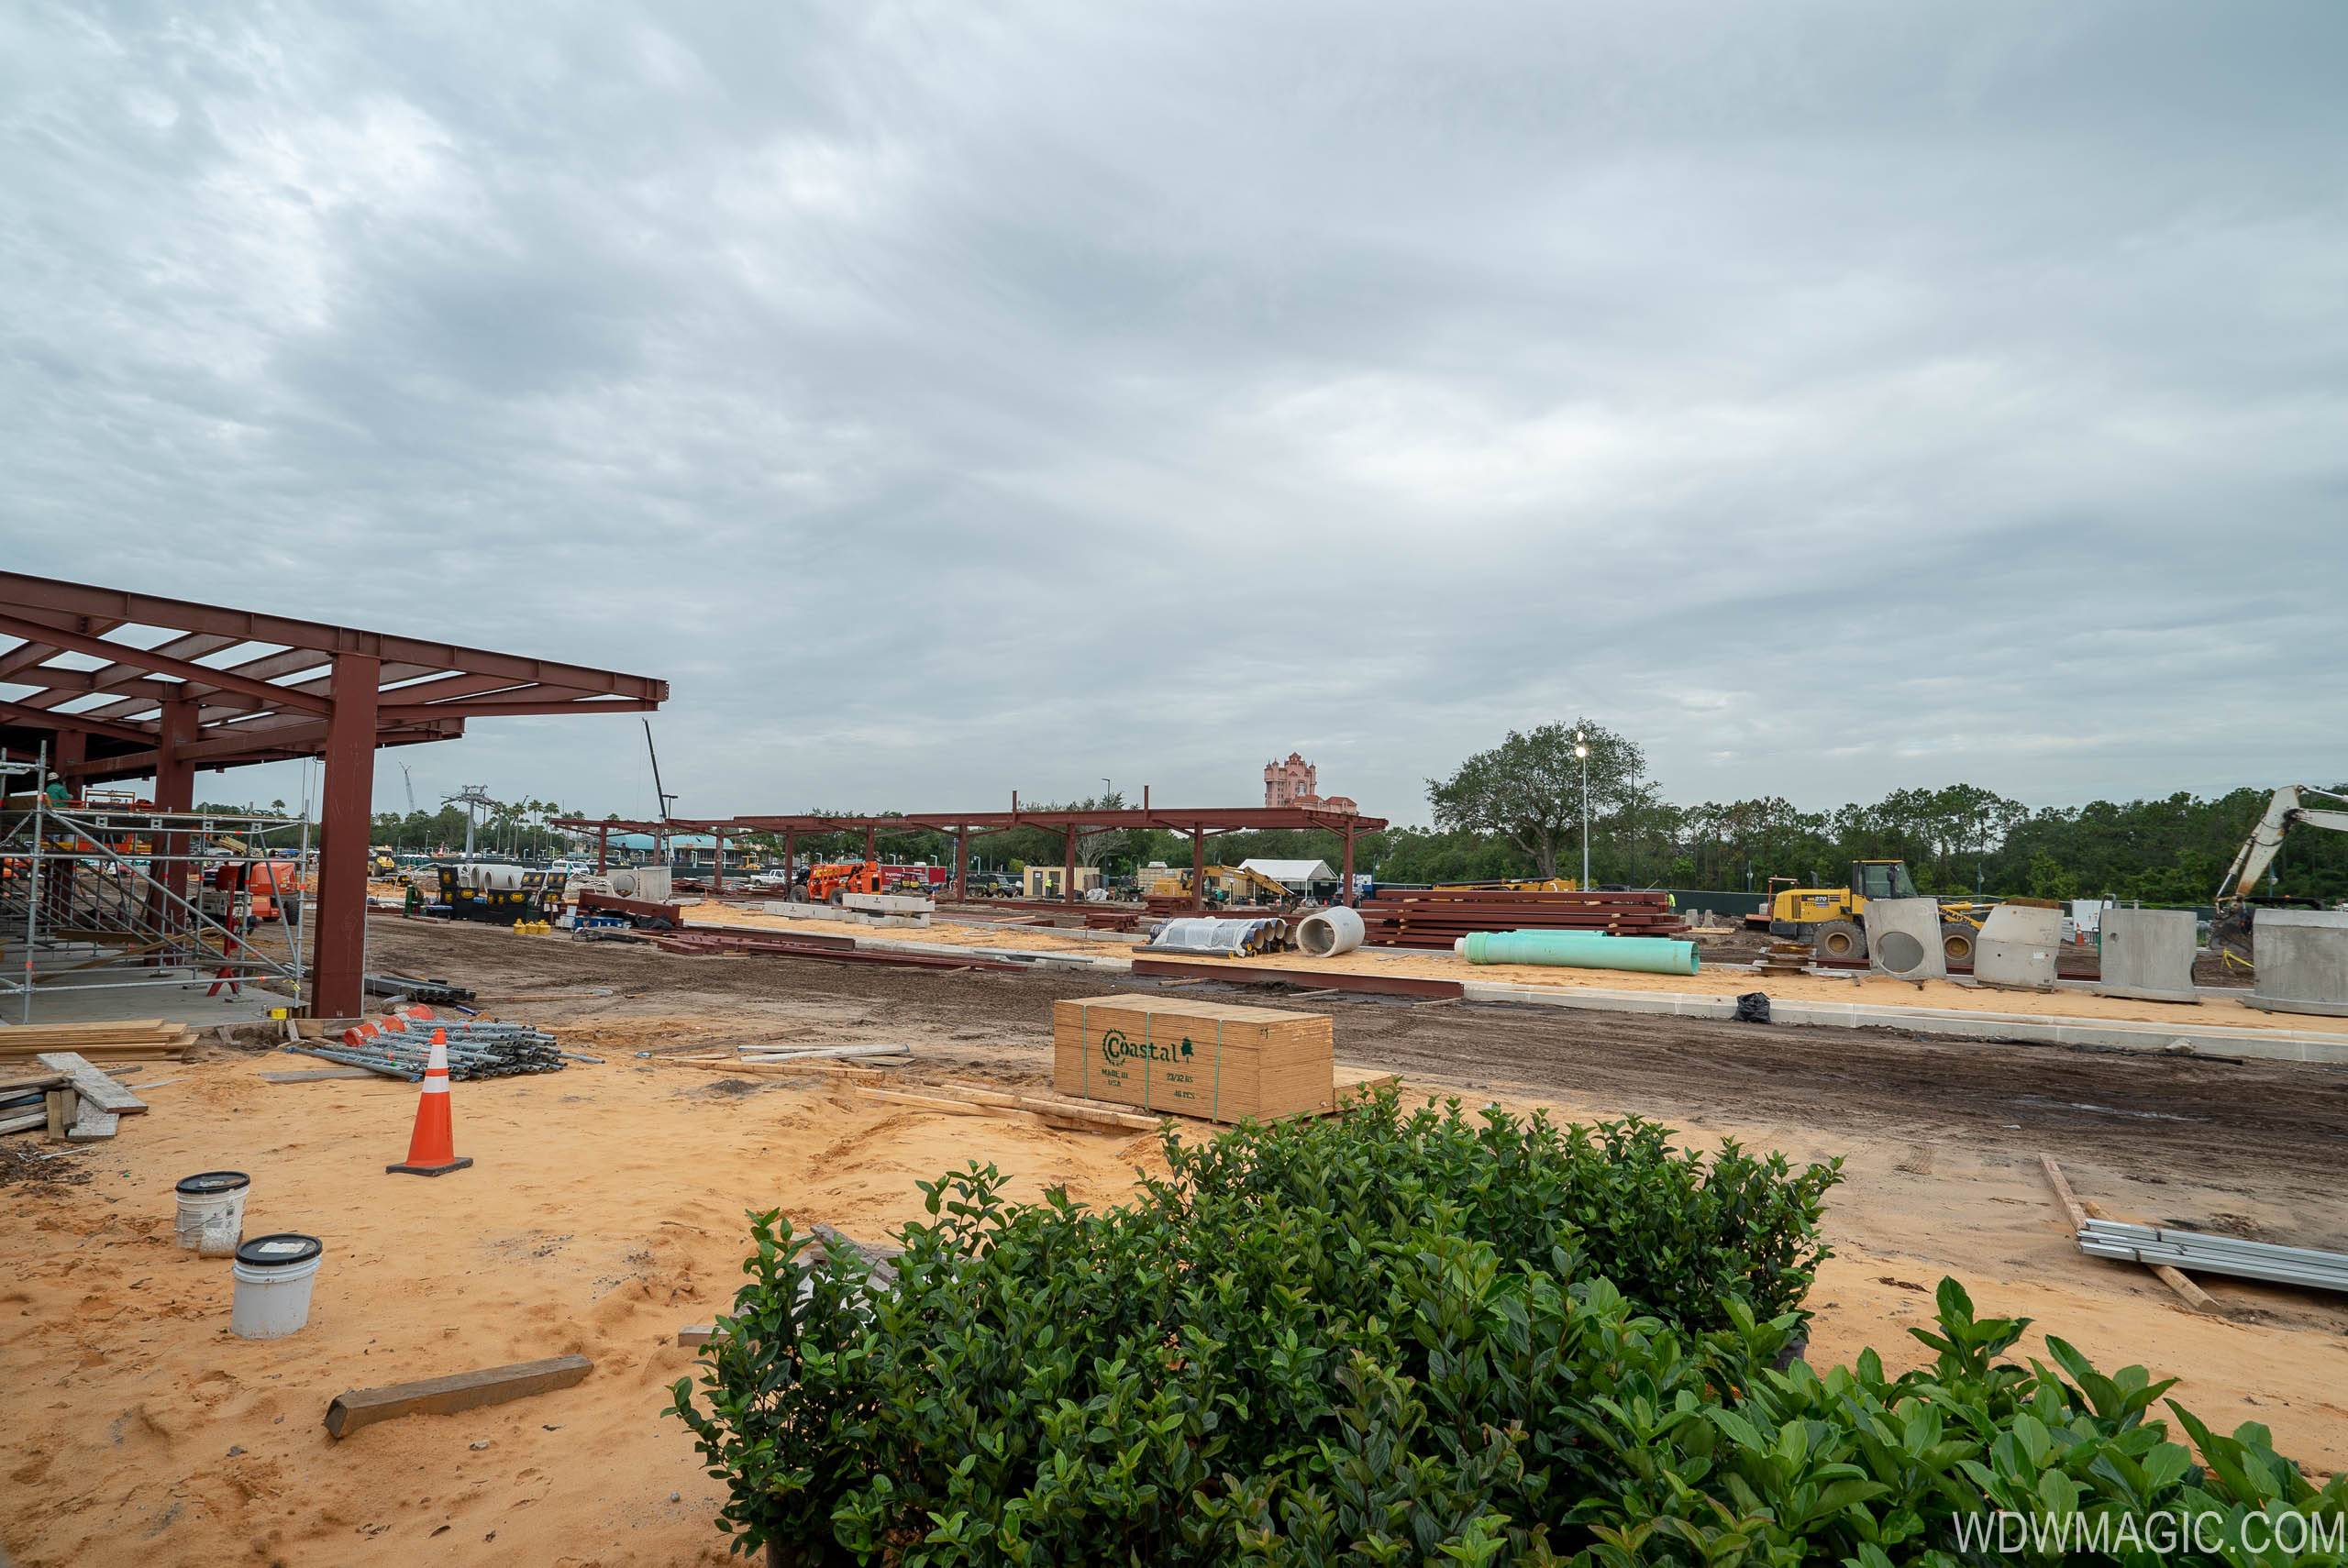 New resort bus stop area under construction at the Studios